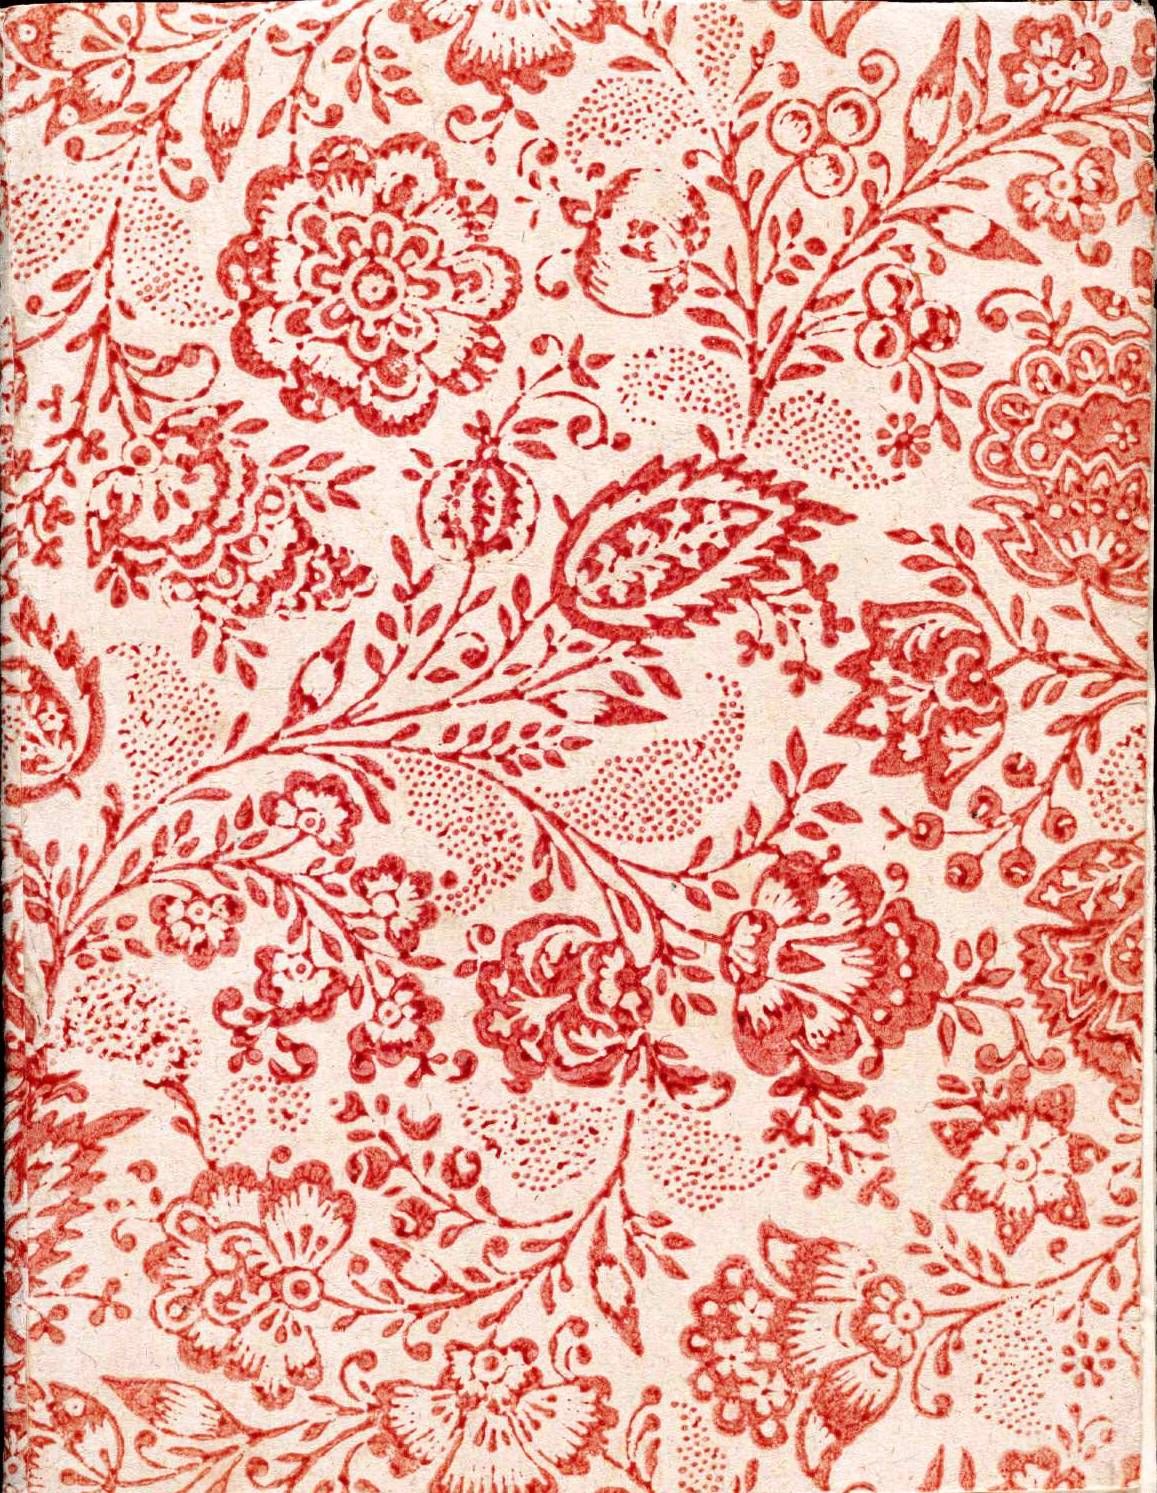 wallpaper pattern design,red,pattern,wrapping paper,textile,design